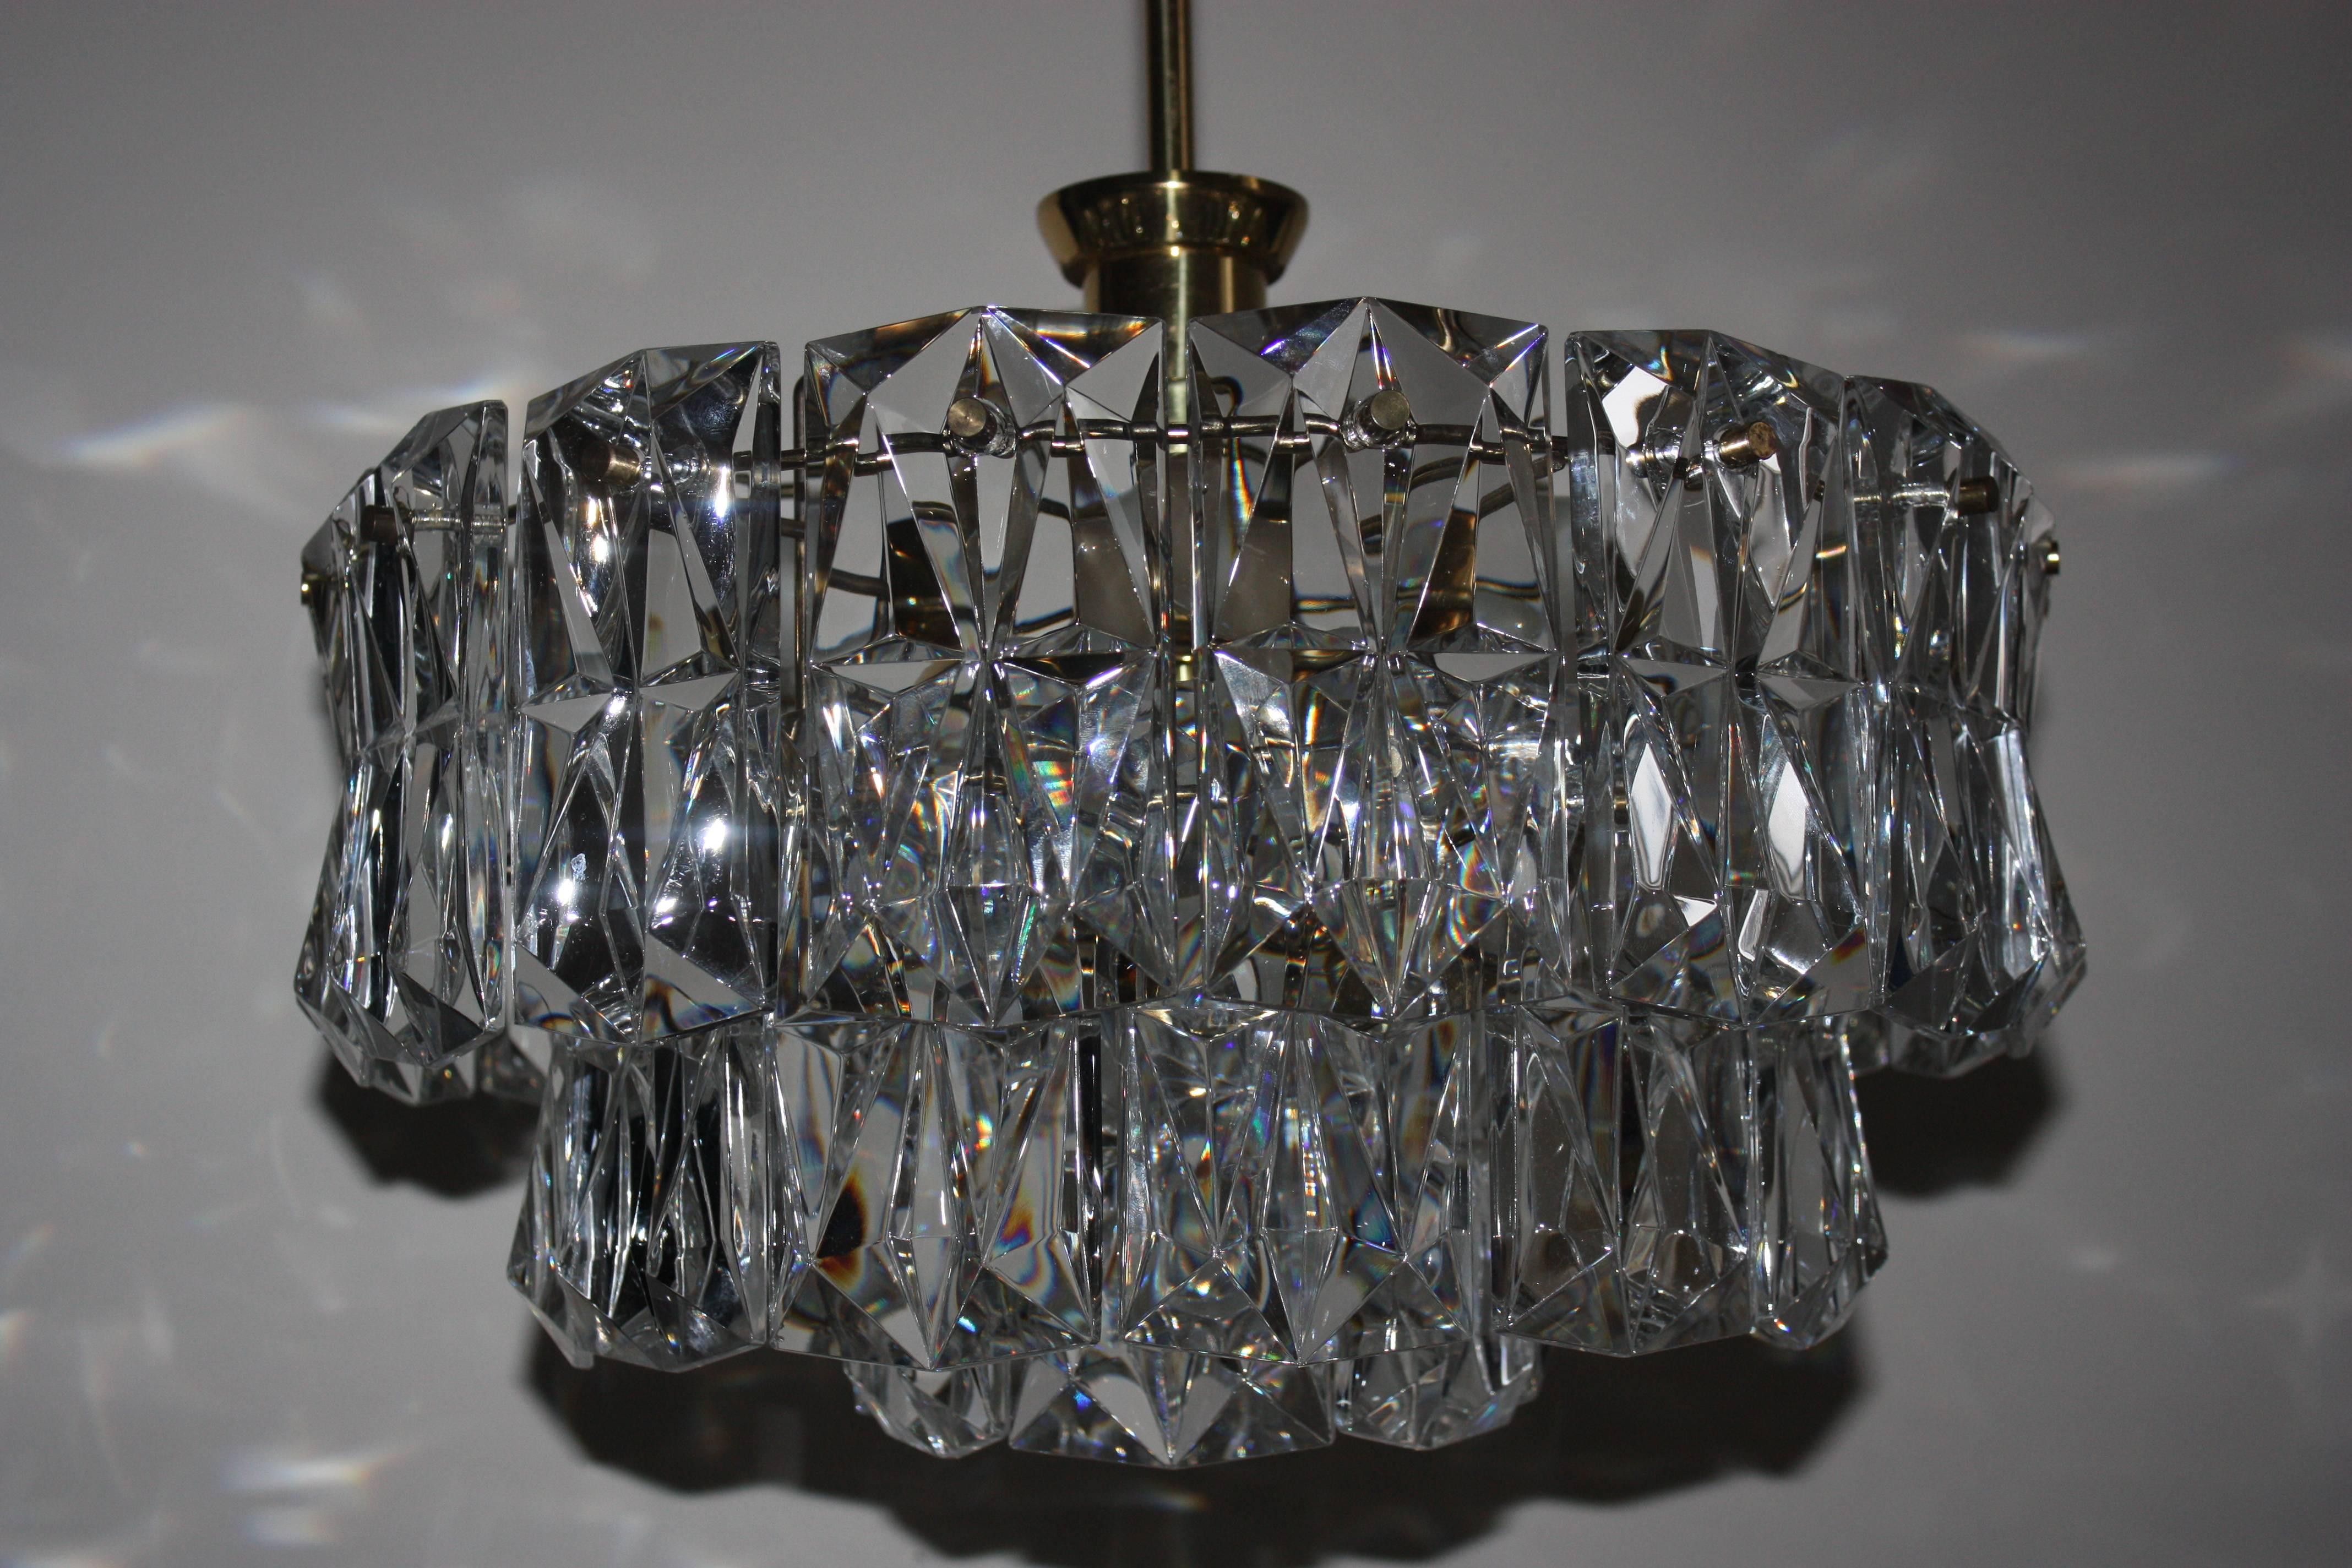 Beautiful Mid-Century Modern seven-light crystal chandelier by Kinkeldey, Germany, circa 1960s.
High quality three-tier gilt brass frame with heavy crystal elements.
Socket: Six x E14 and one x E27 for standard screw bulbs. Rewired for